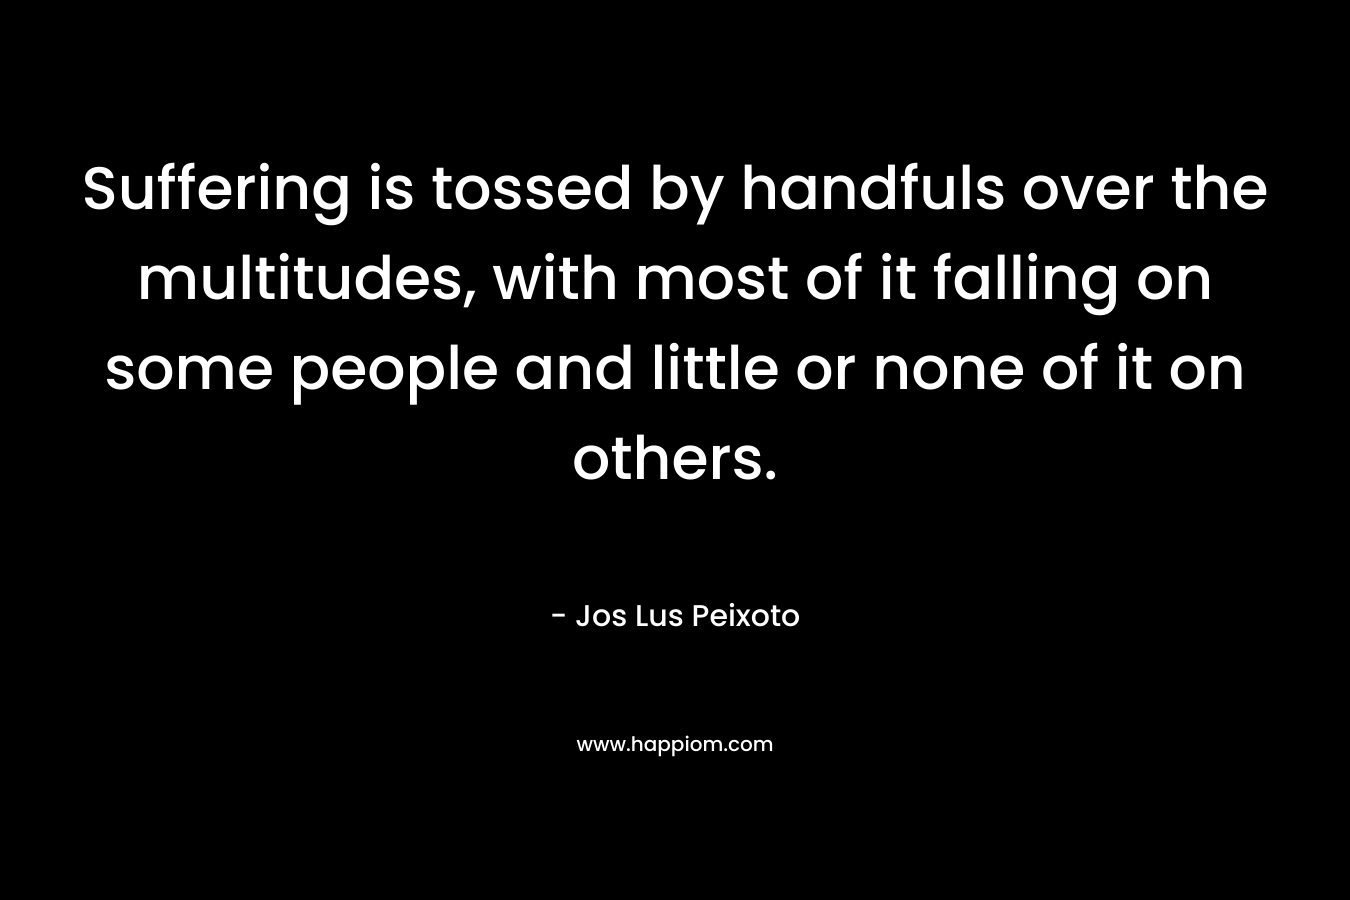 Suffering is tossed by handfuls over the multitudes, with most of it falling on some people and little or none of it on others. – Jos Lus Peixoto